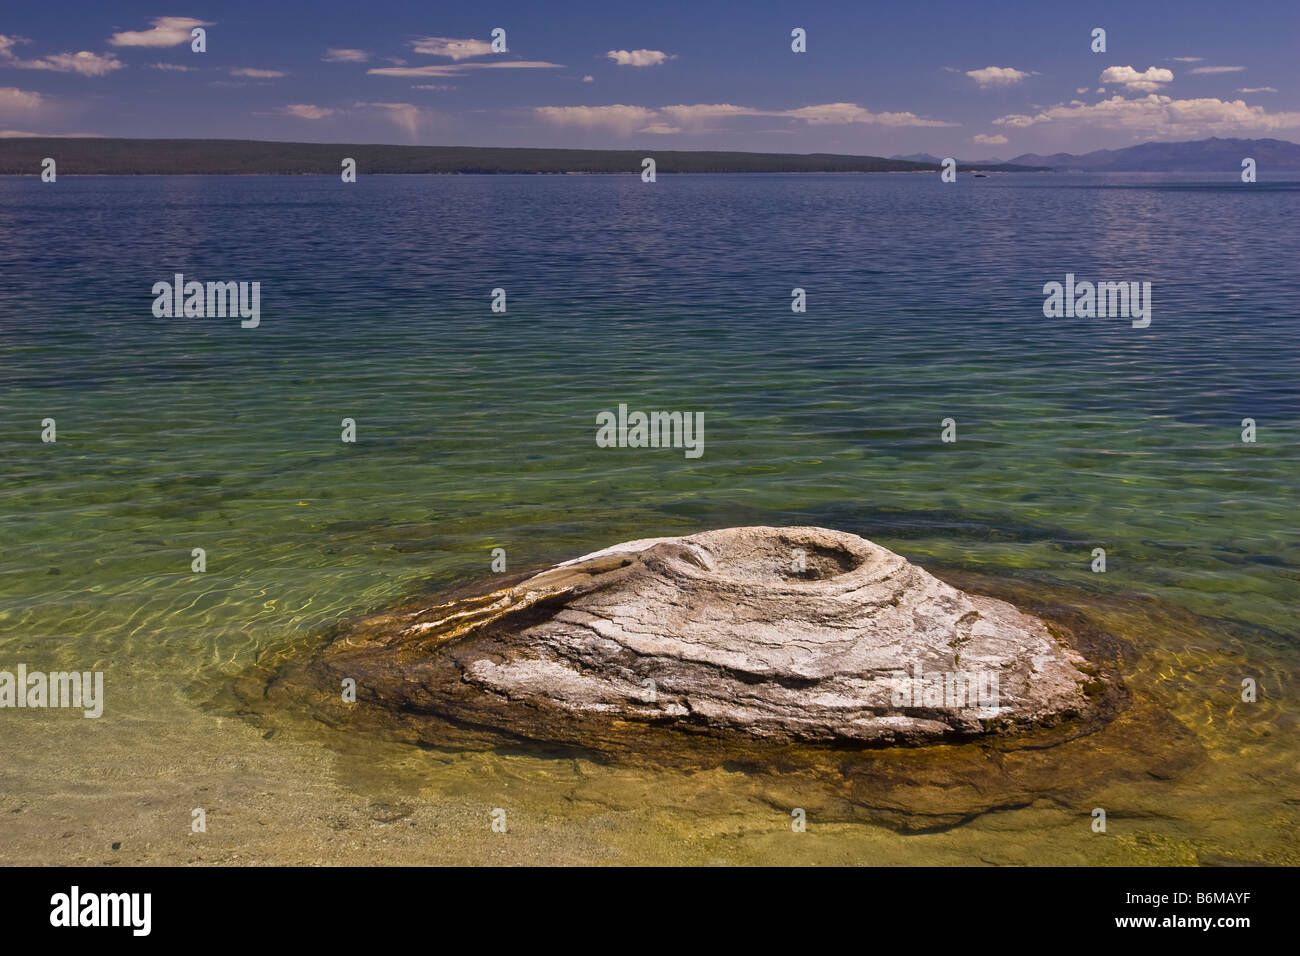 YELLOWSTONE NATIONAL PARK, WYOMING, USA - Fishing Cone, in the West Thumb Geyser Basin, on the shore of Lake Yellowstone Stock Photo